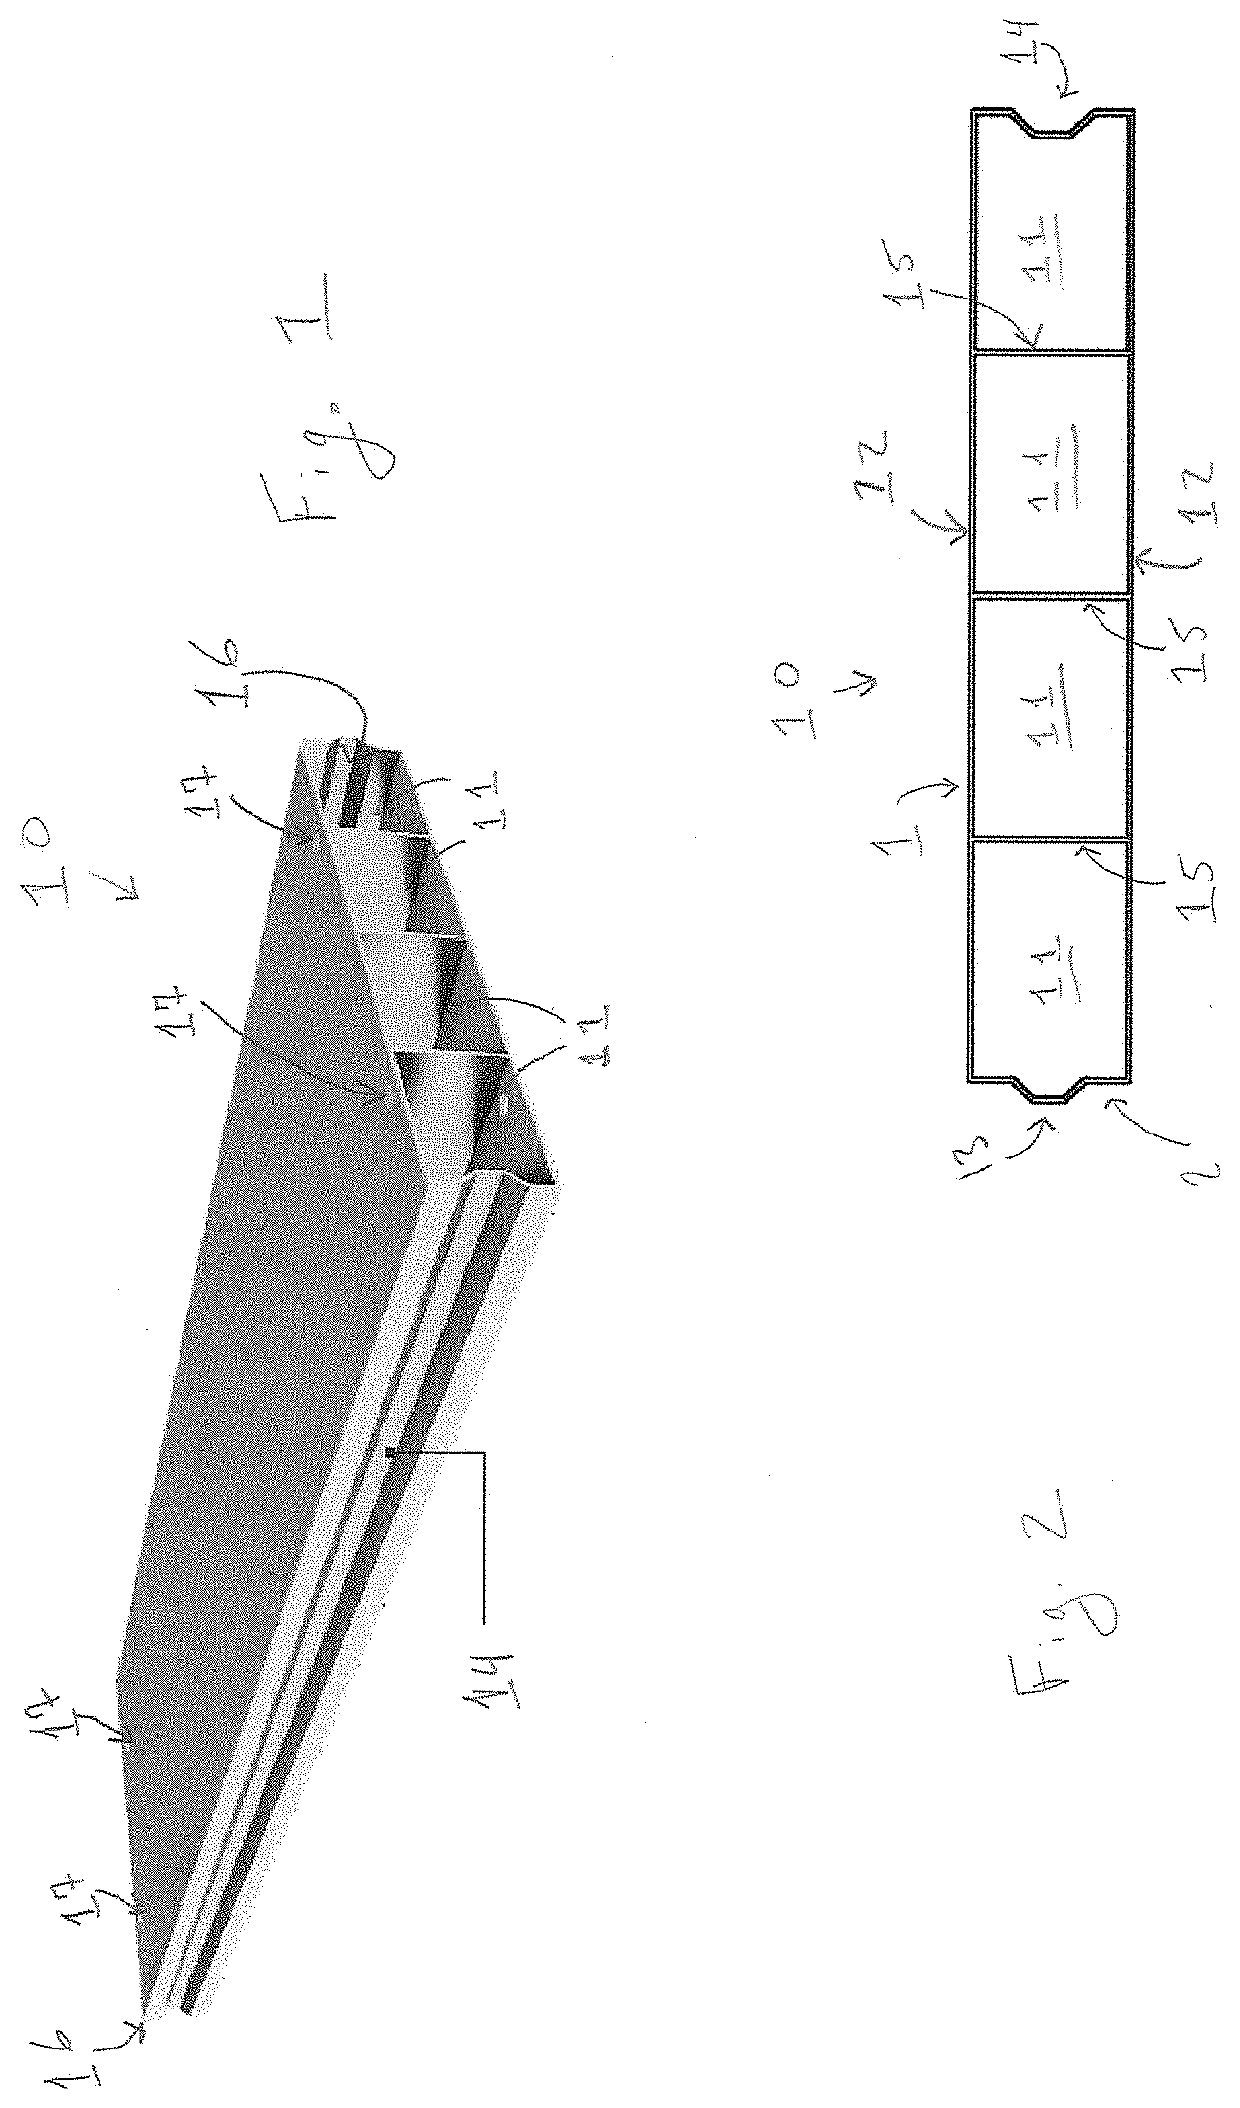 Multi-purpose structural panels and systems for assembling structures